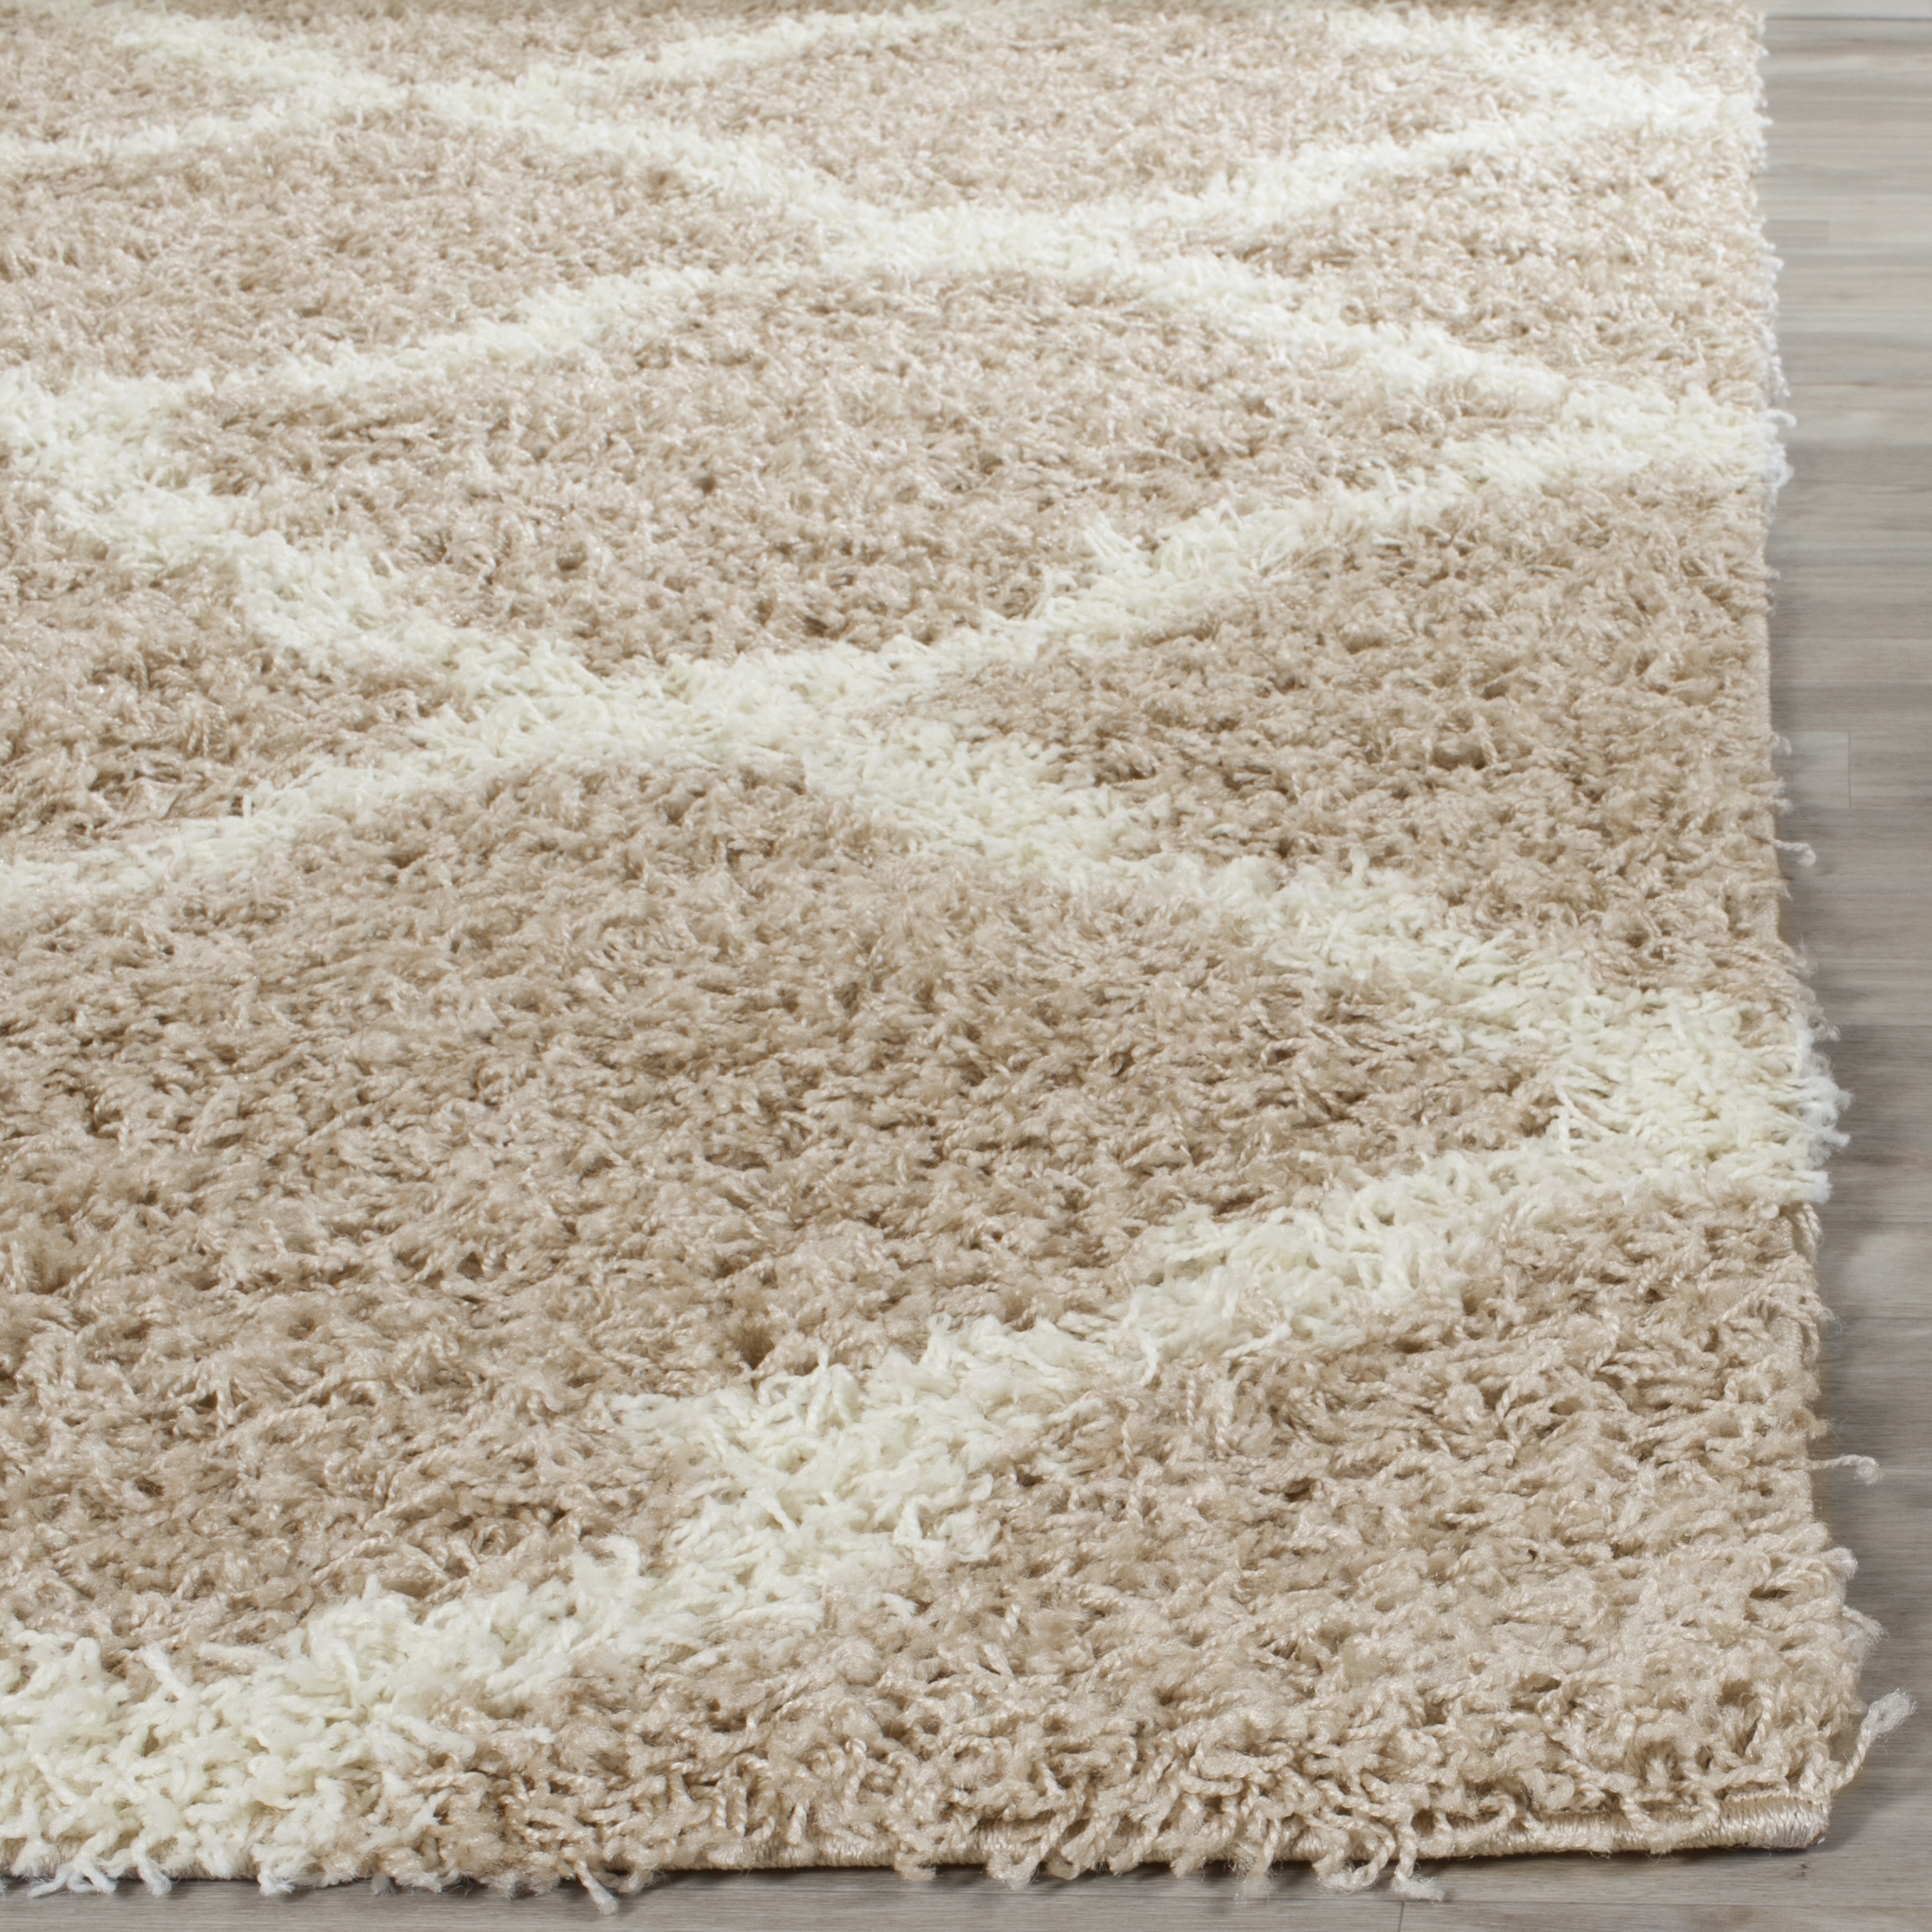 Arlo Home Woven Area Rug, SGD257D, Beige/Ivory,  6' X 6' Square - Image 2